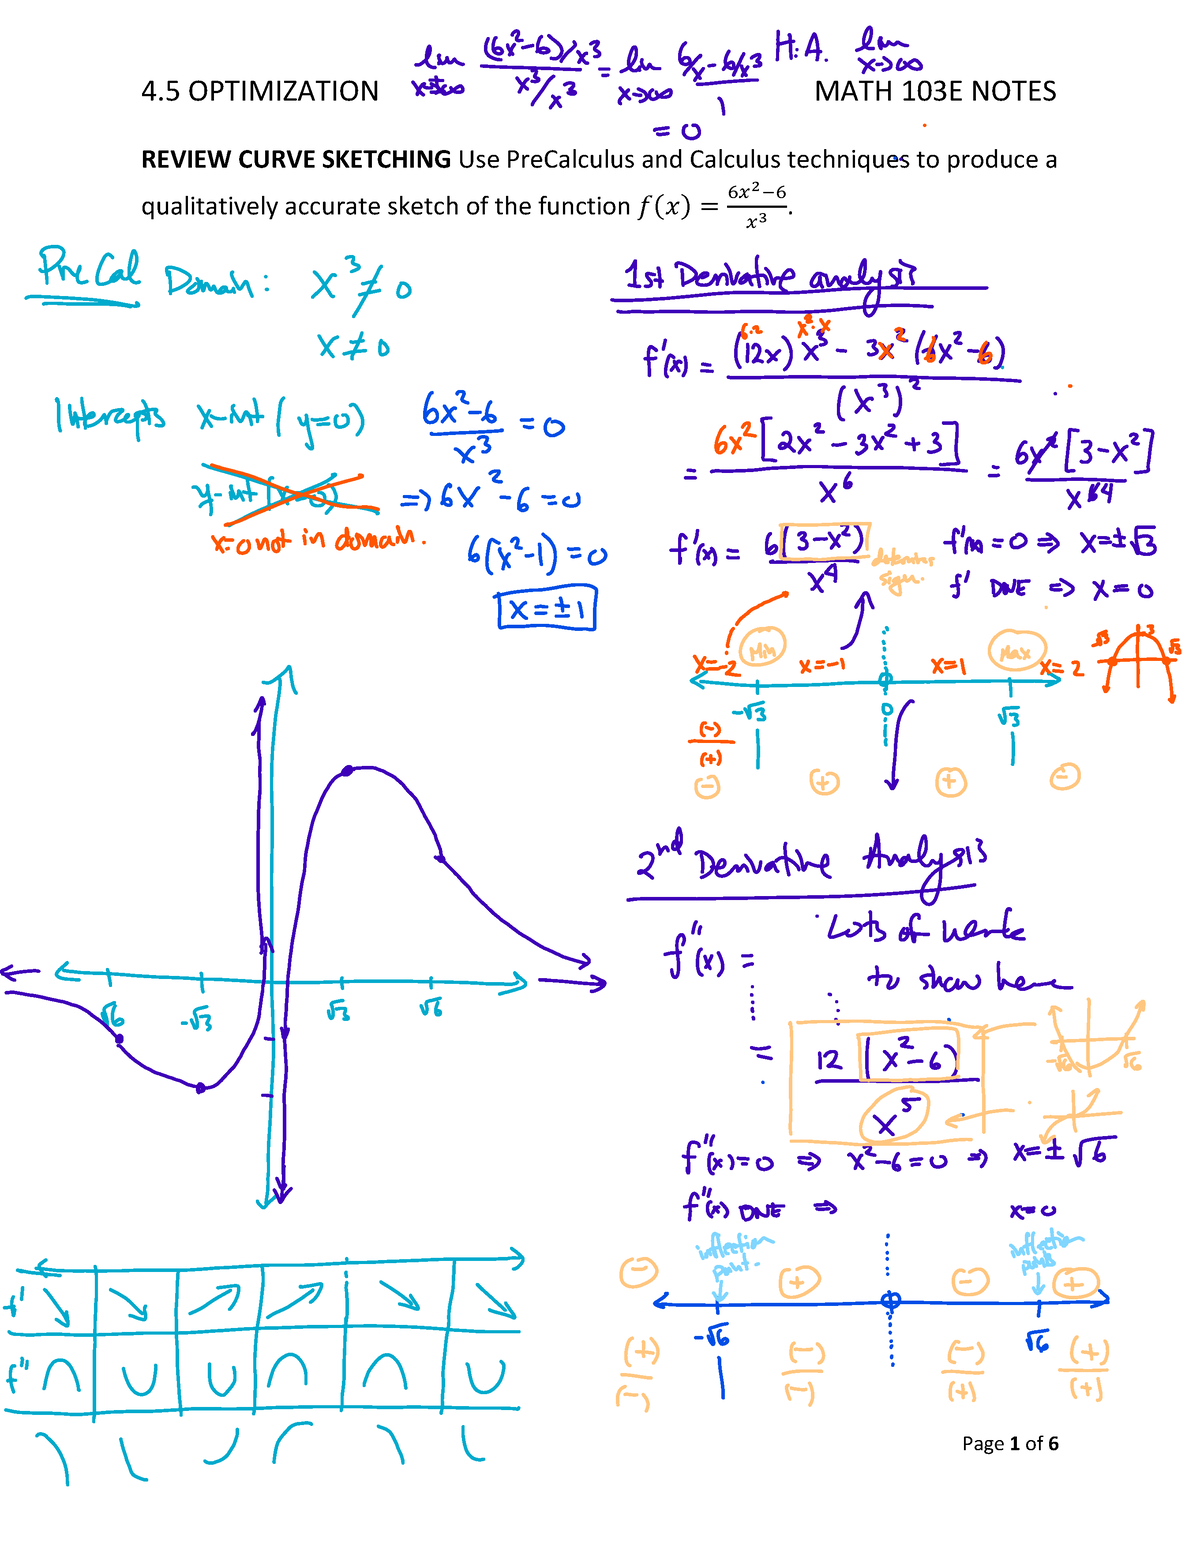 4.5 Optimization Filled In - REVIEW CURVE SKETCHING Use PreCalculus and ...